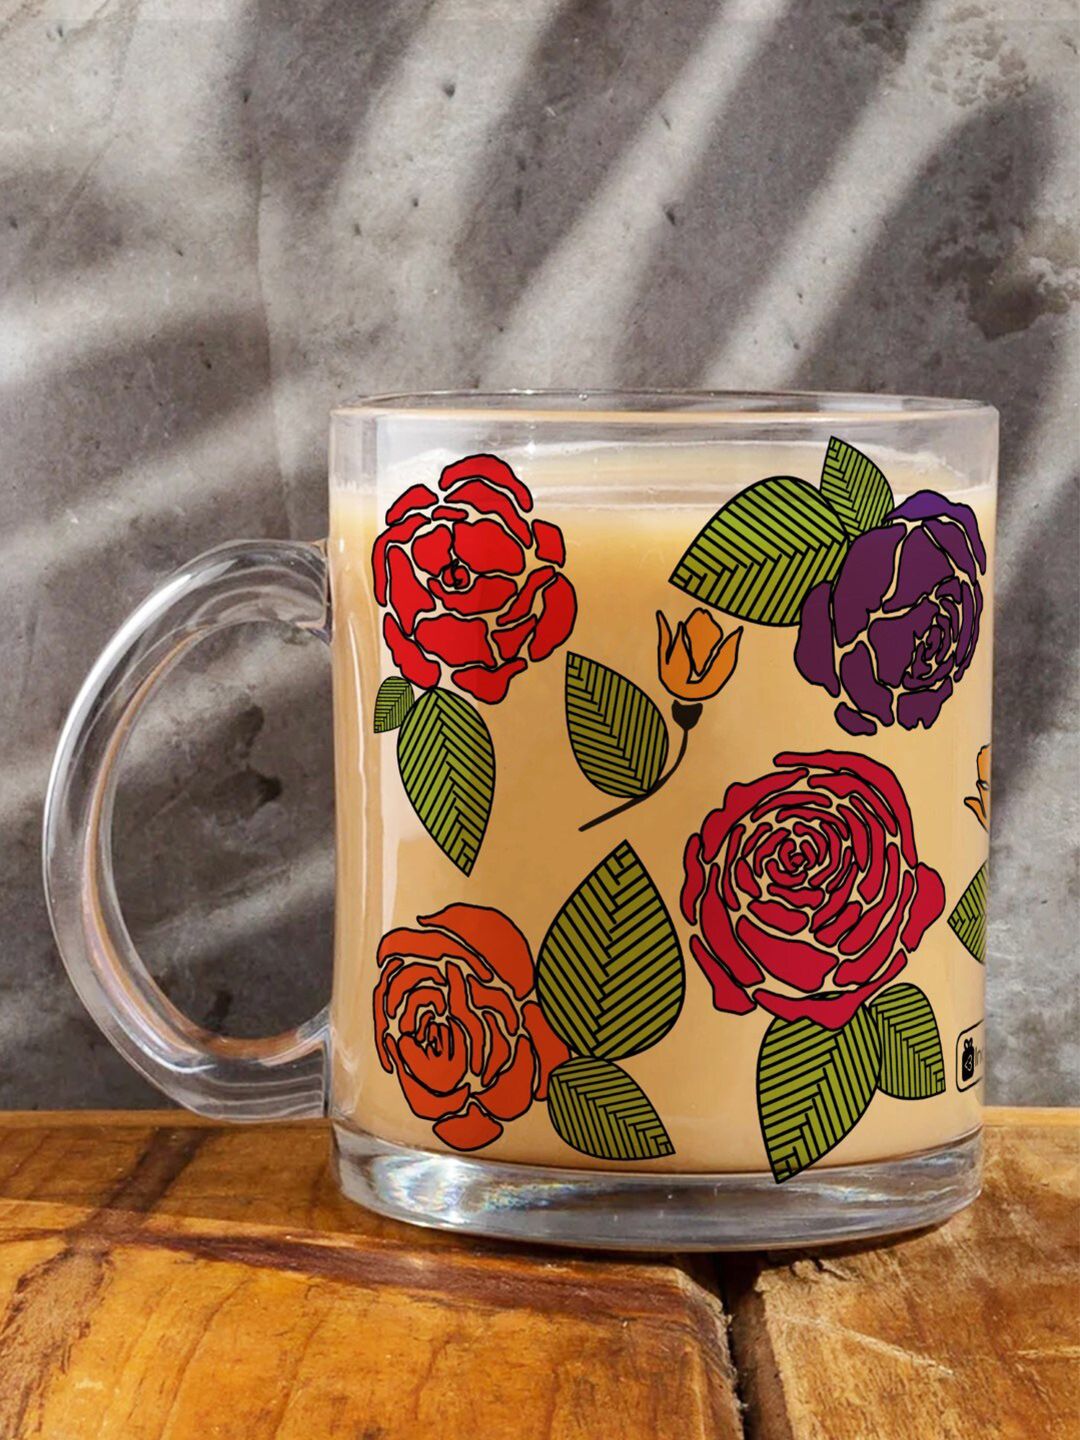 Indigifts Transparent & Red Printed Glass Mug Price in India